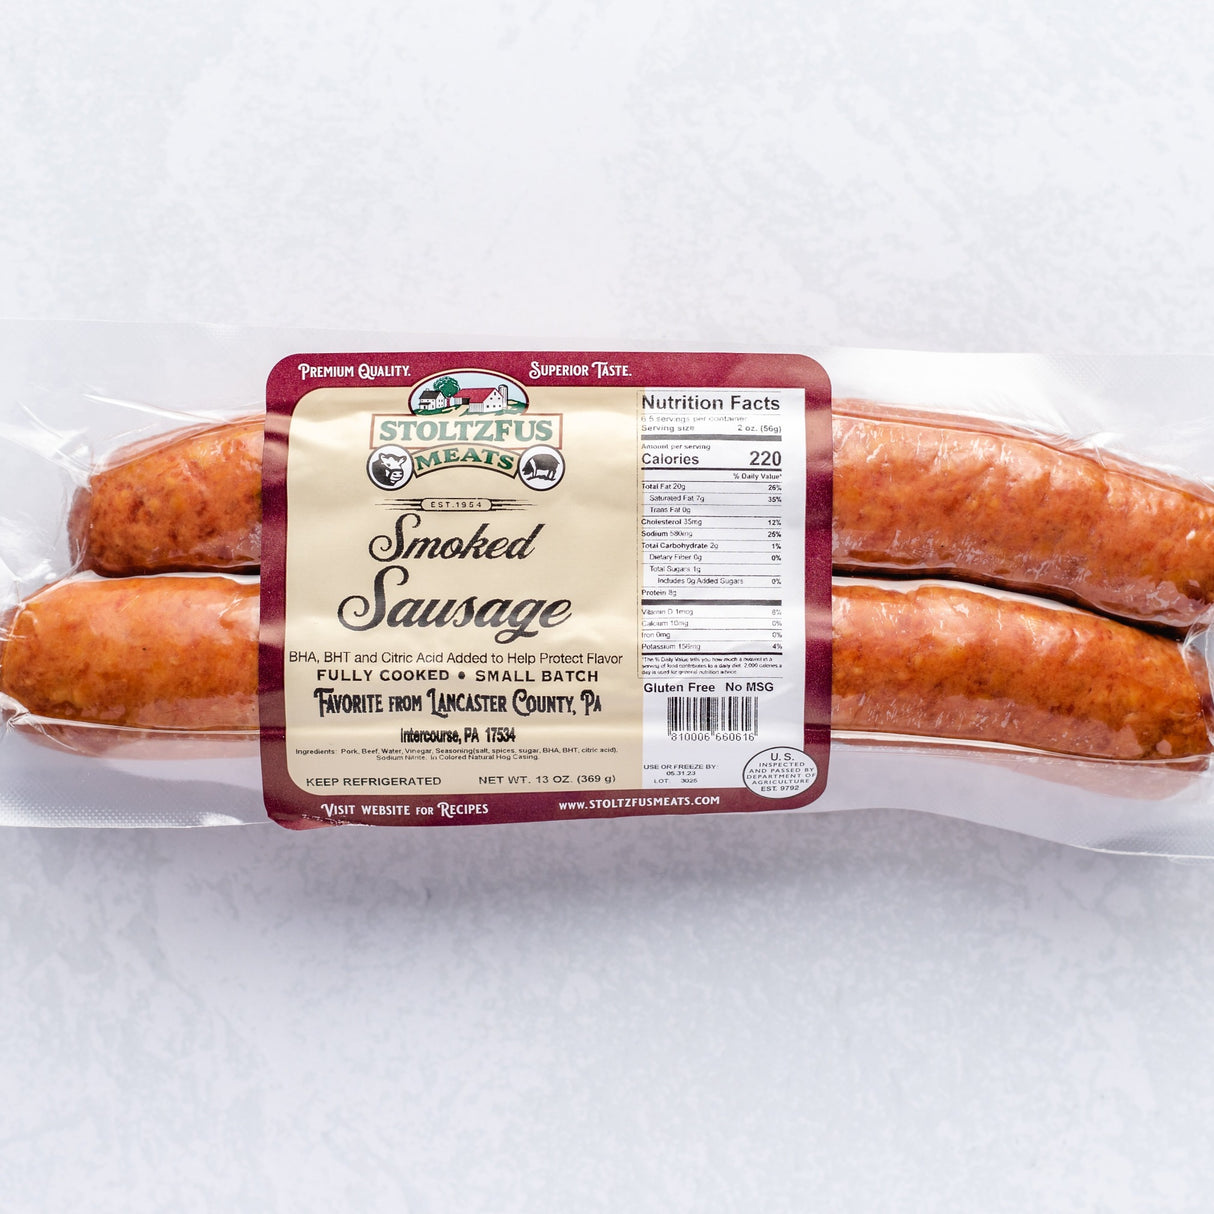  a package of smoked sausage